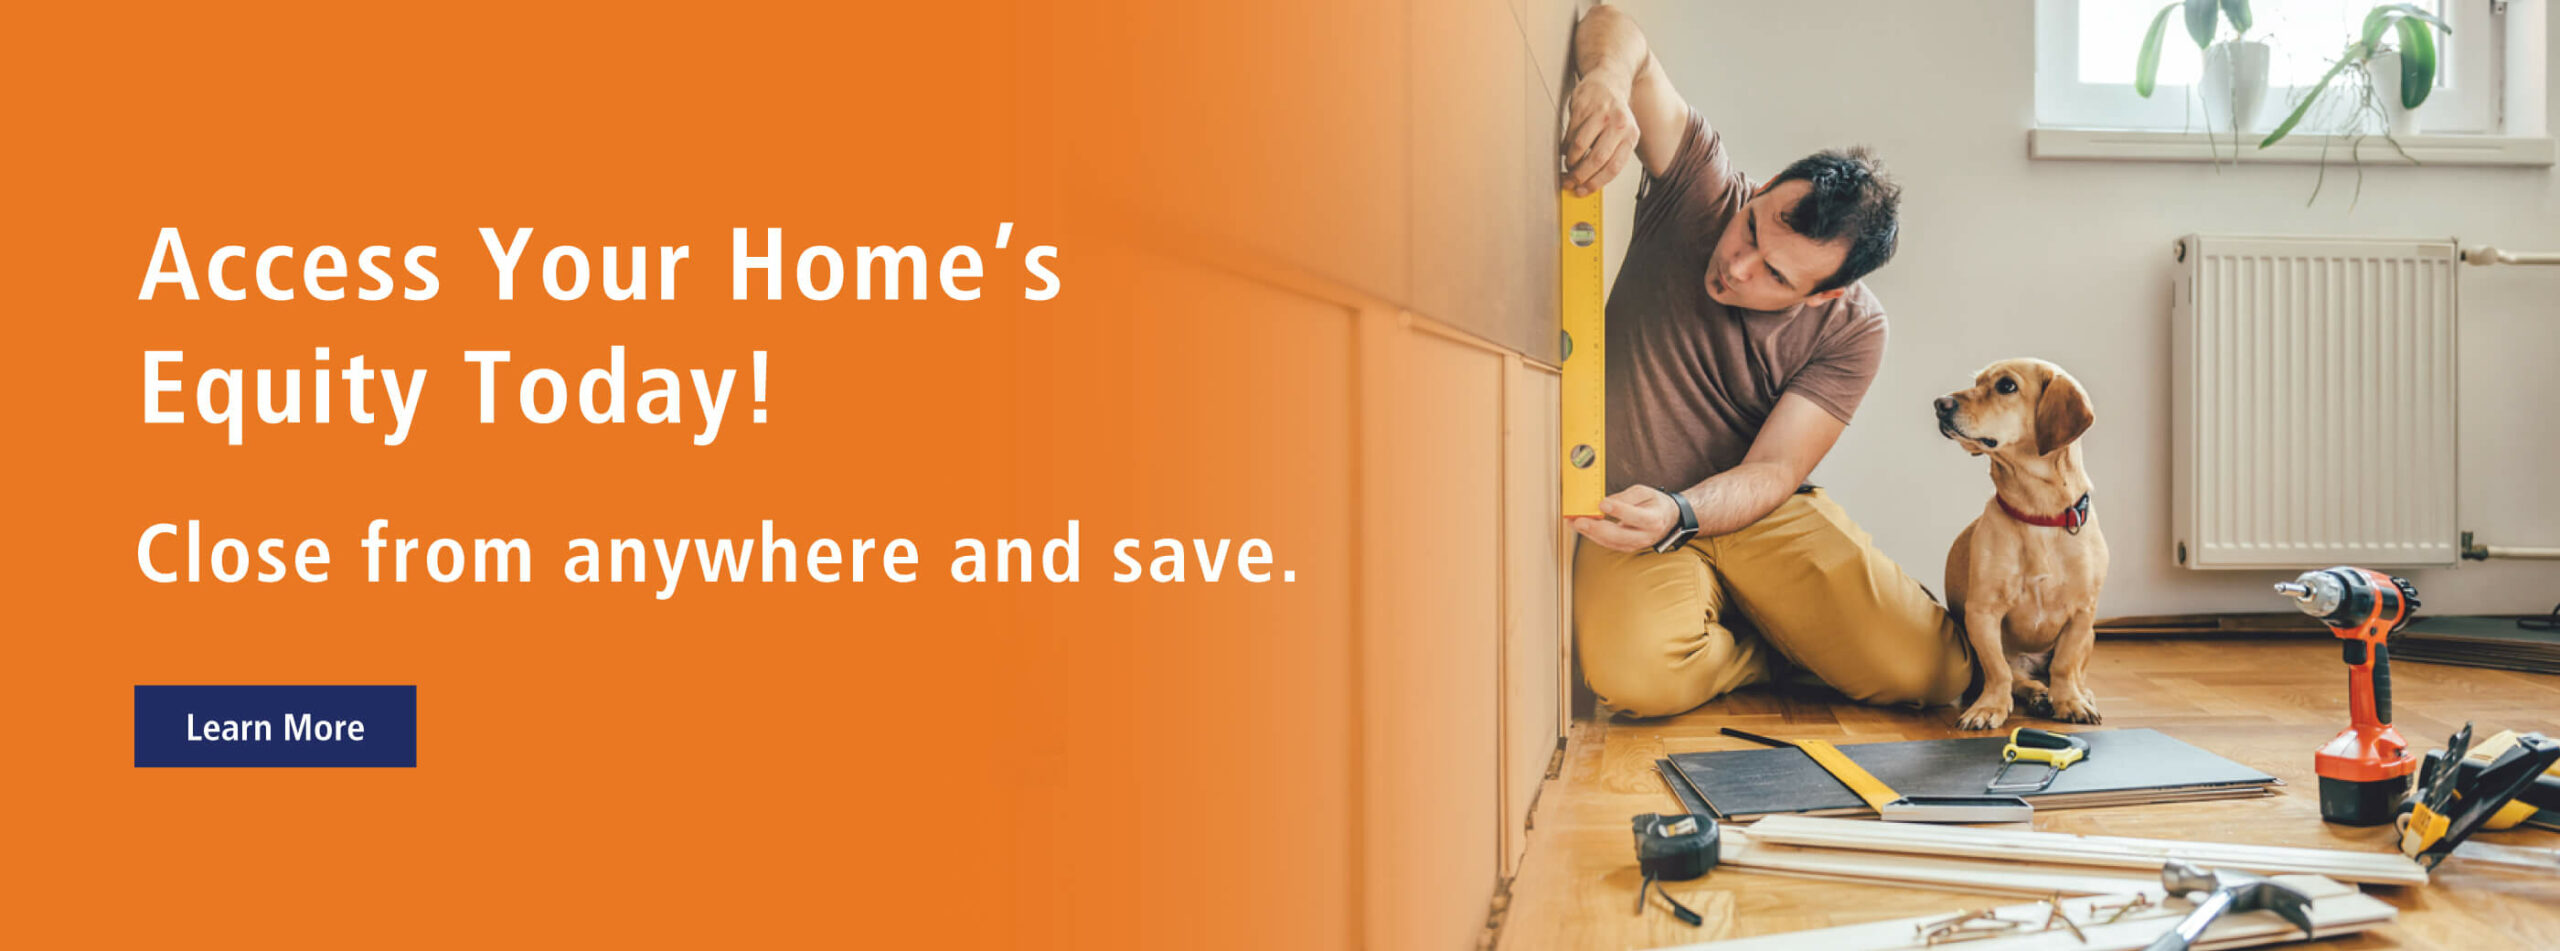 Access your home's equity and close from anywhere.